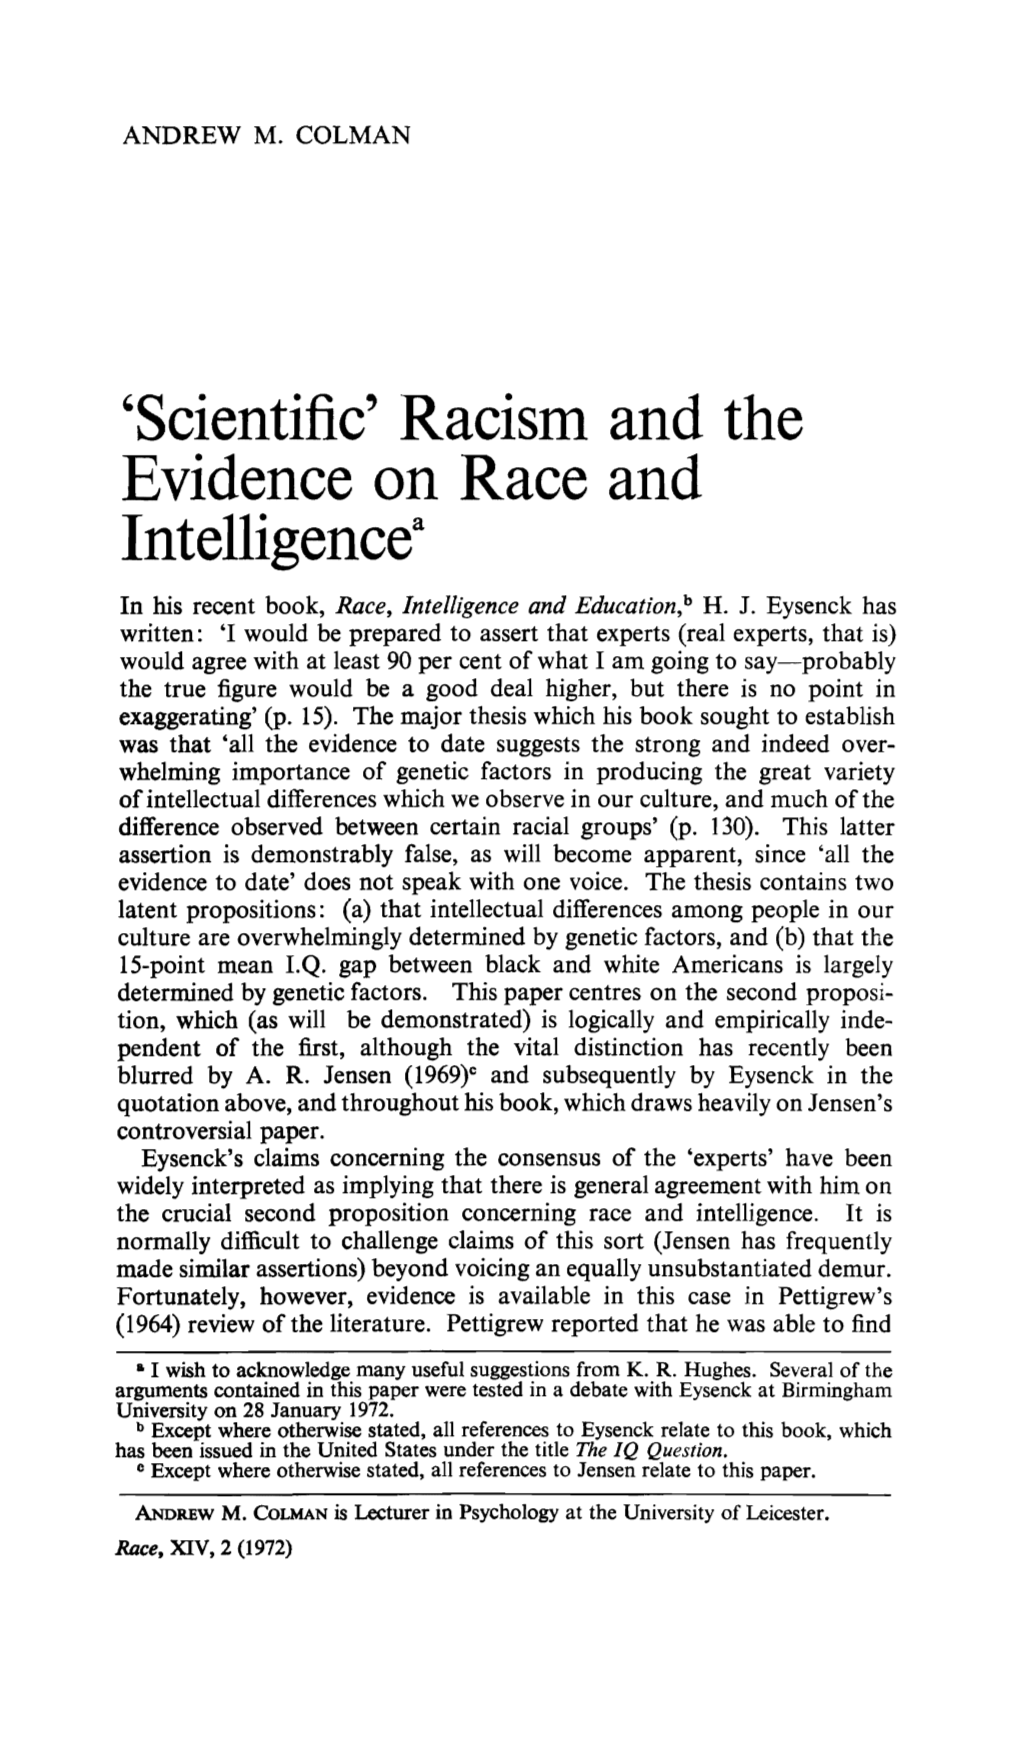 “Scientific” Racism and the Evidence on Race and Intelligence